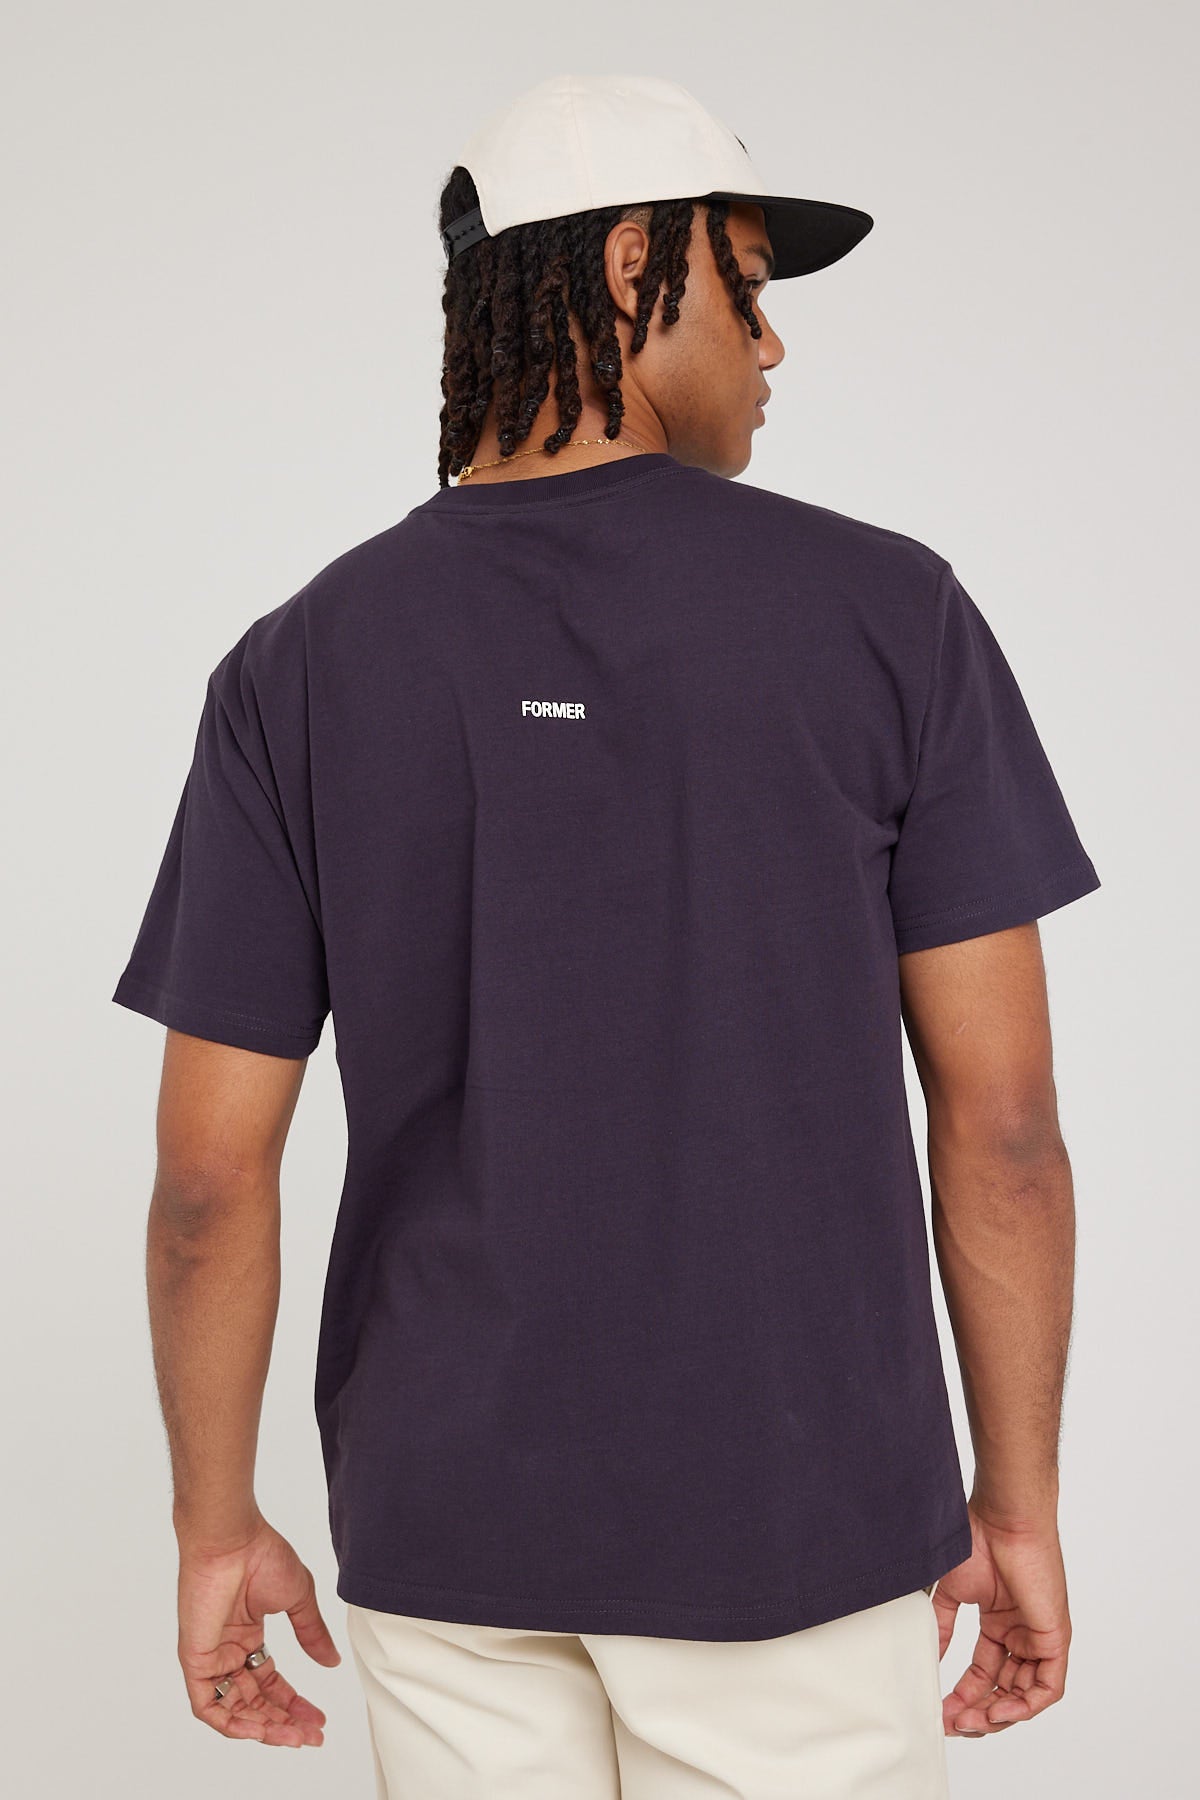 Former Cracked Crux Tee Navy